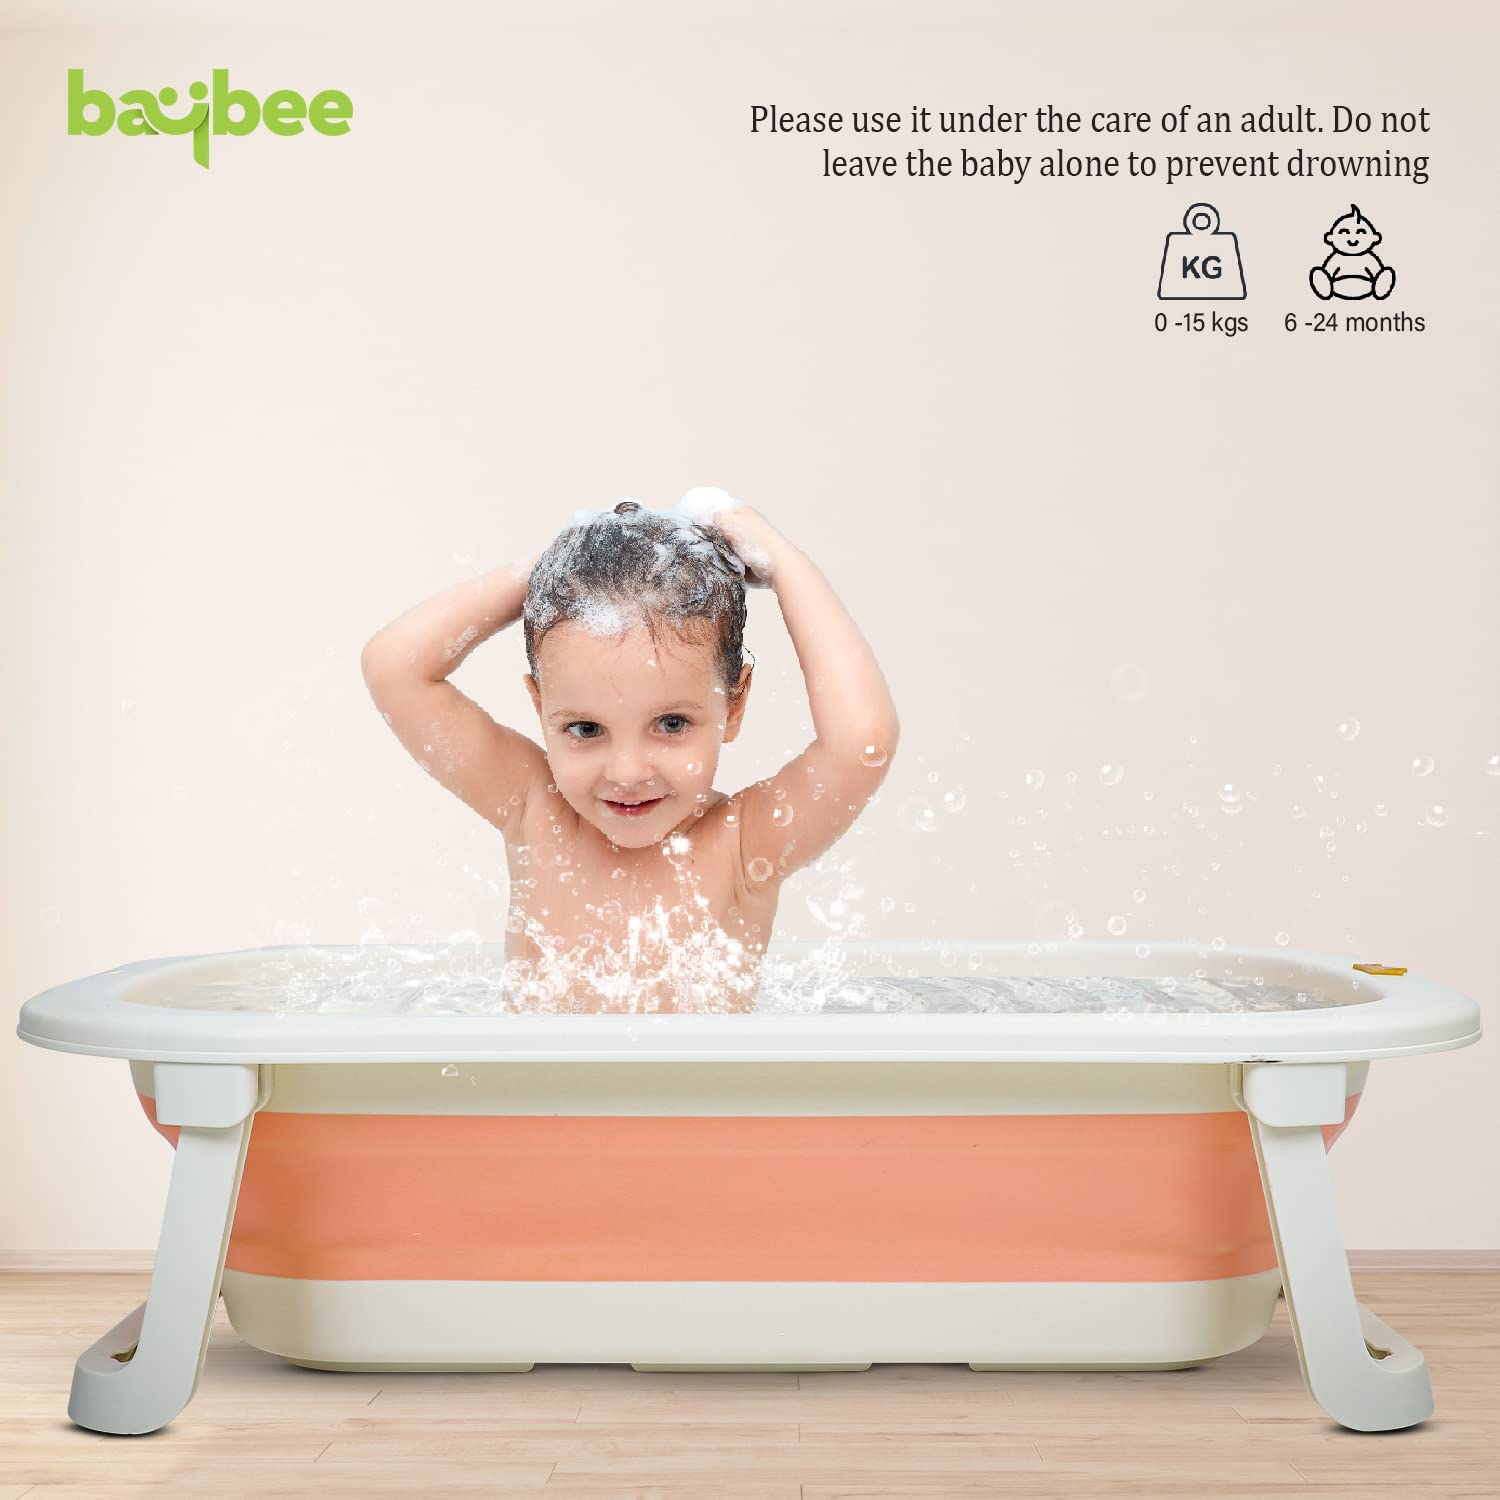 Aura Collapsible / Foldable Baby Bath Tub for Kids, Space Saving Design, Non-Slip Portable Jacuzzi Bathtub for Baby with Stand & Drainer. NB-3 Years. (Peach)